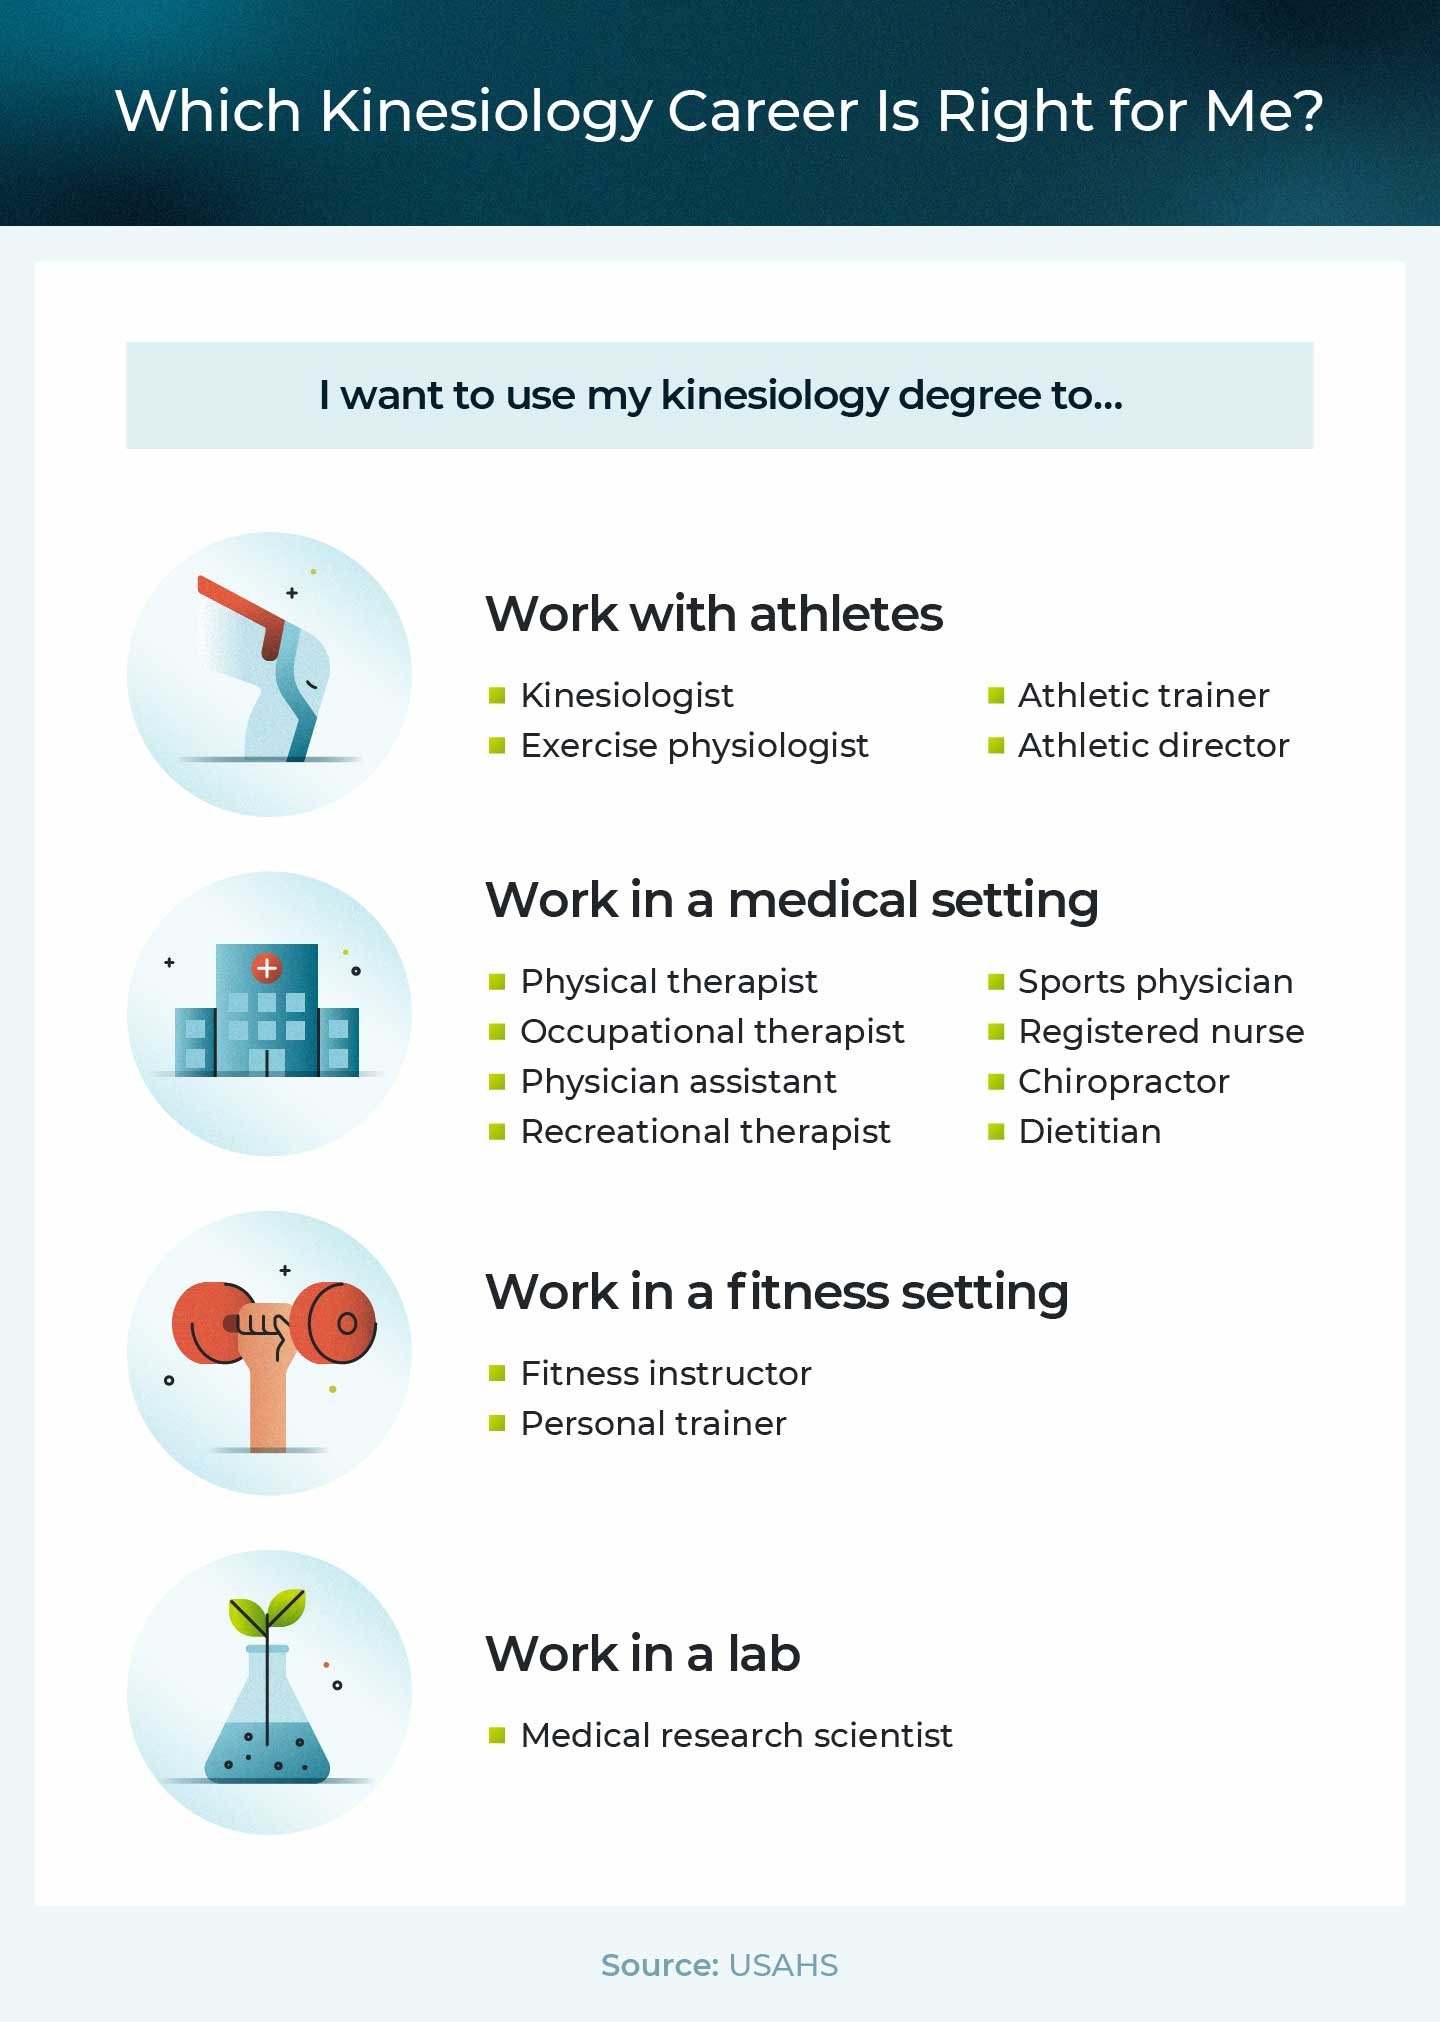 List of different kinesiology careers by work settings.